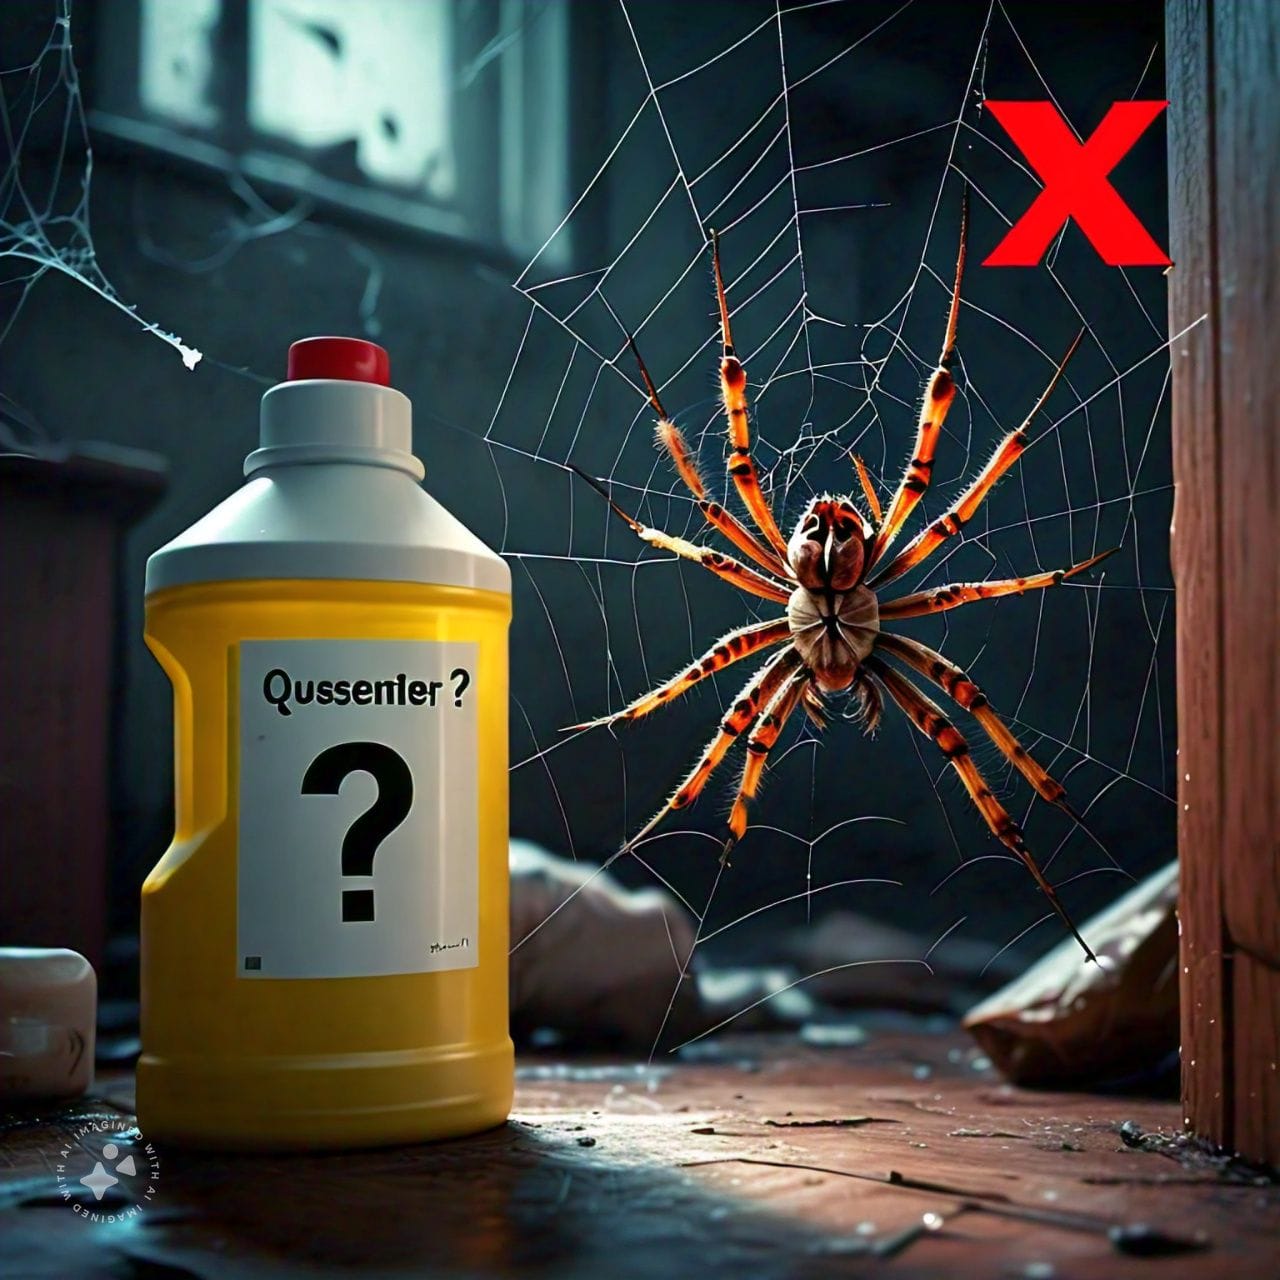 A spider in a web with a red "X" symbol over it, next to a bleach bottle with a question mark.